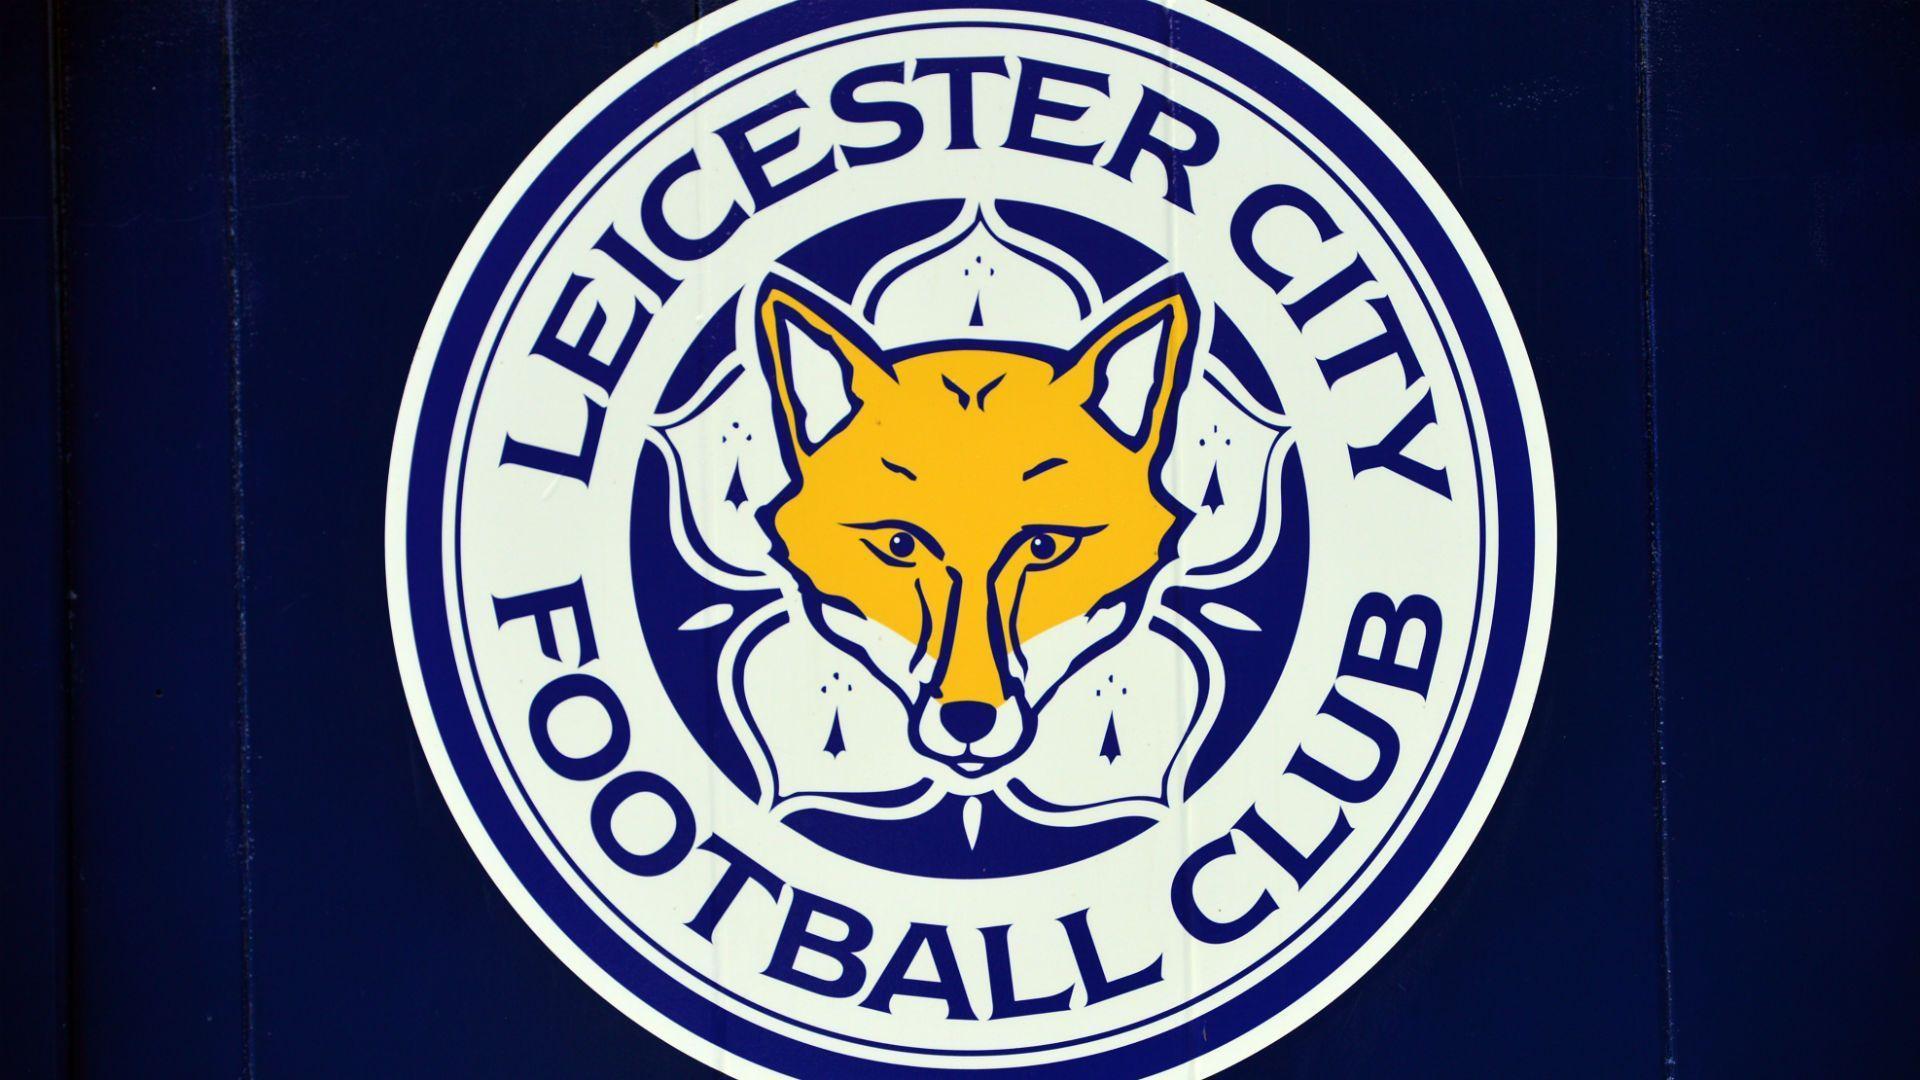 Leicester City Wallpaper : Download wallpapers Leicester City FC, logo ...